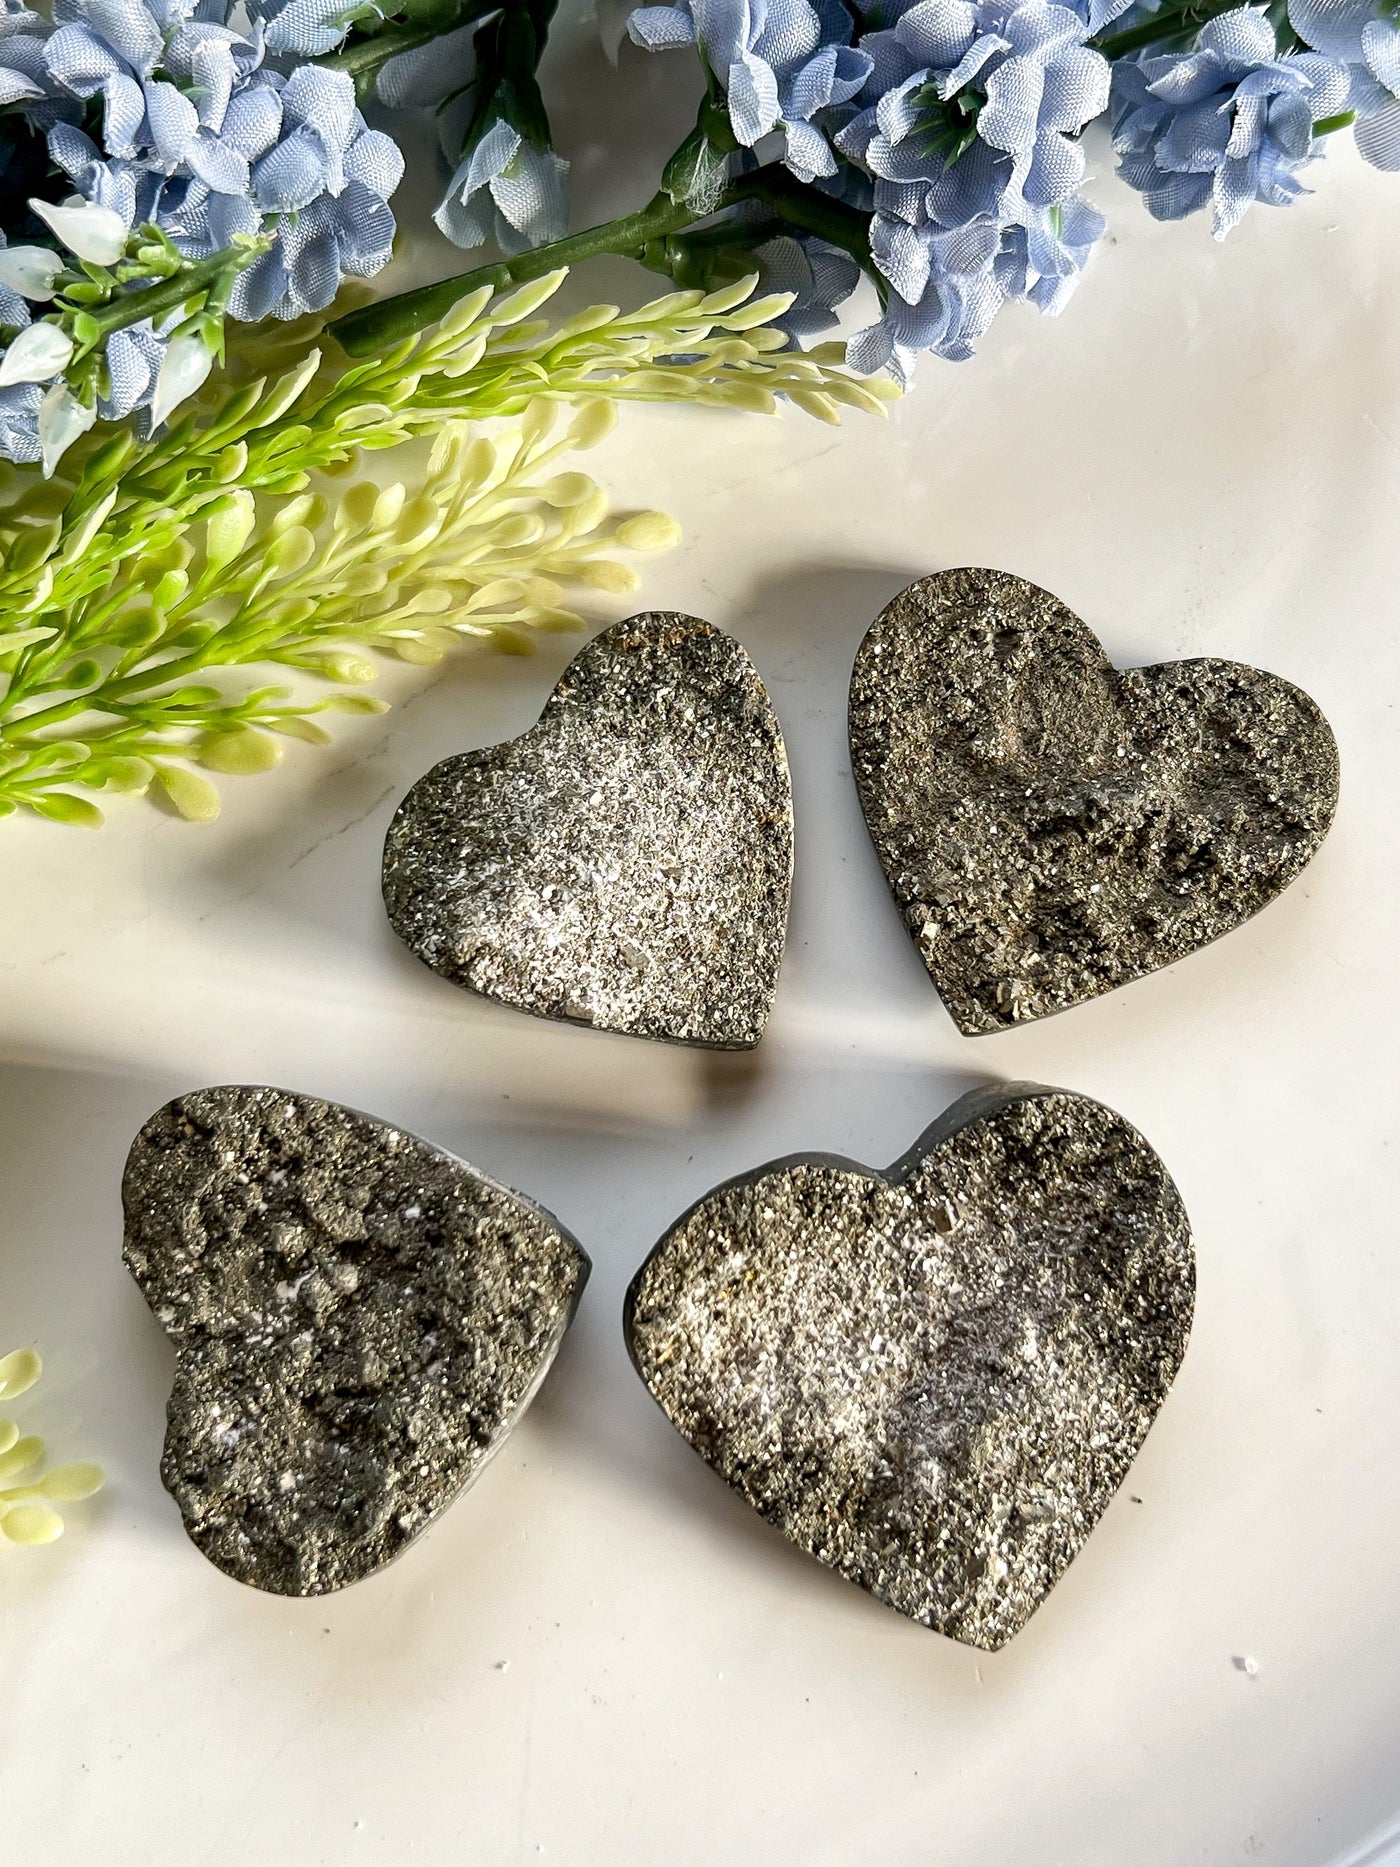 PYRITE HEART CARVINGS Revive In Style Vintage Furniture Painted Refinished Redesign Beautiful One of a Kind Artistic Antique Unique Home Decor Interior Design French Country Shabby Chic Cottage Farmhouse Grandmillenial Coastal Chalk Paint Metallic Glam Eclectic Quality Dovetailed Rustic Furniture Painter Pinterest Bedroom Living Room Entryway Kitchen Home Trends House Styles Decorating ideas